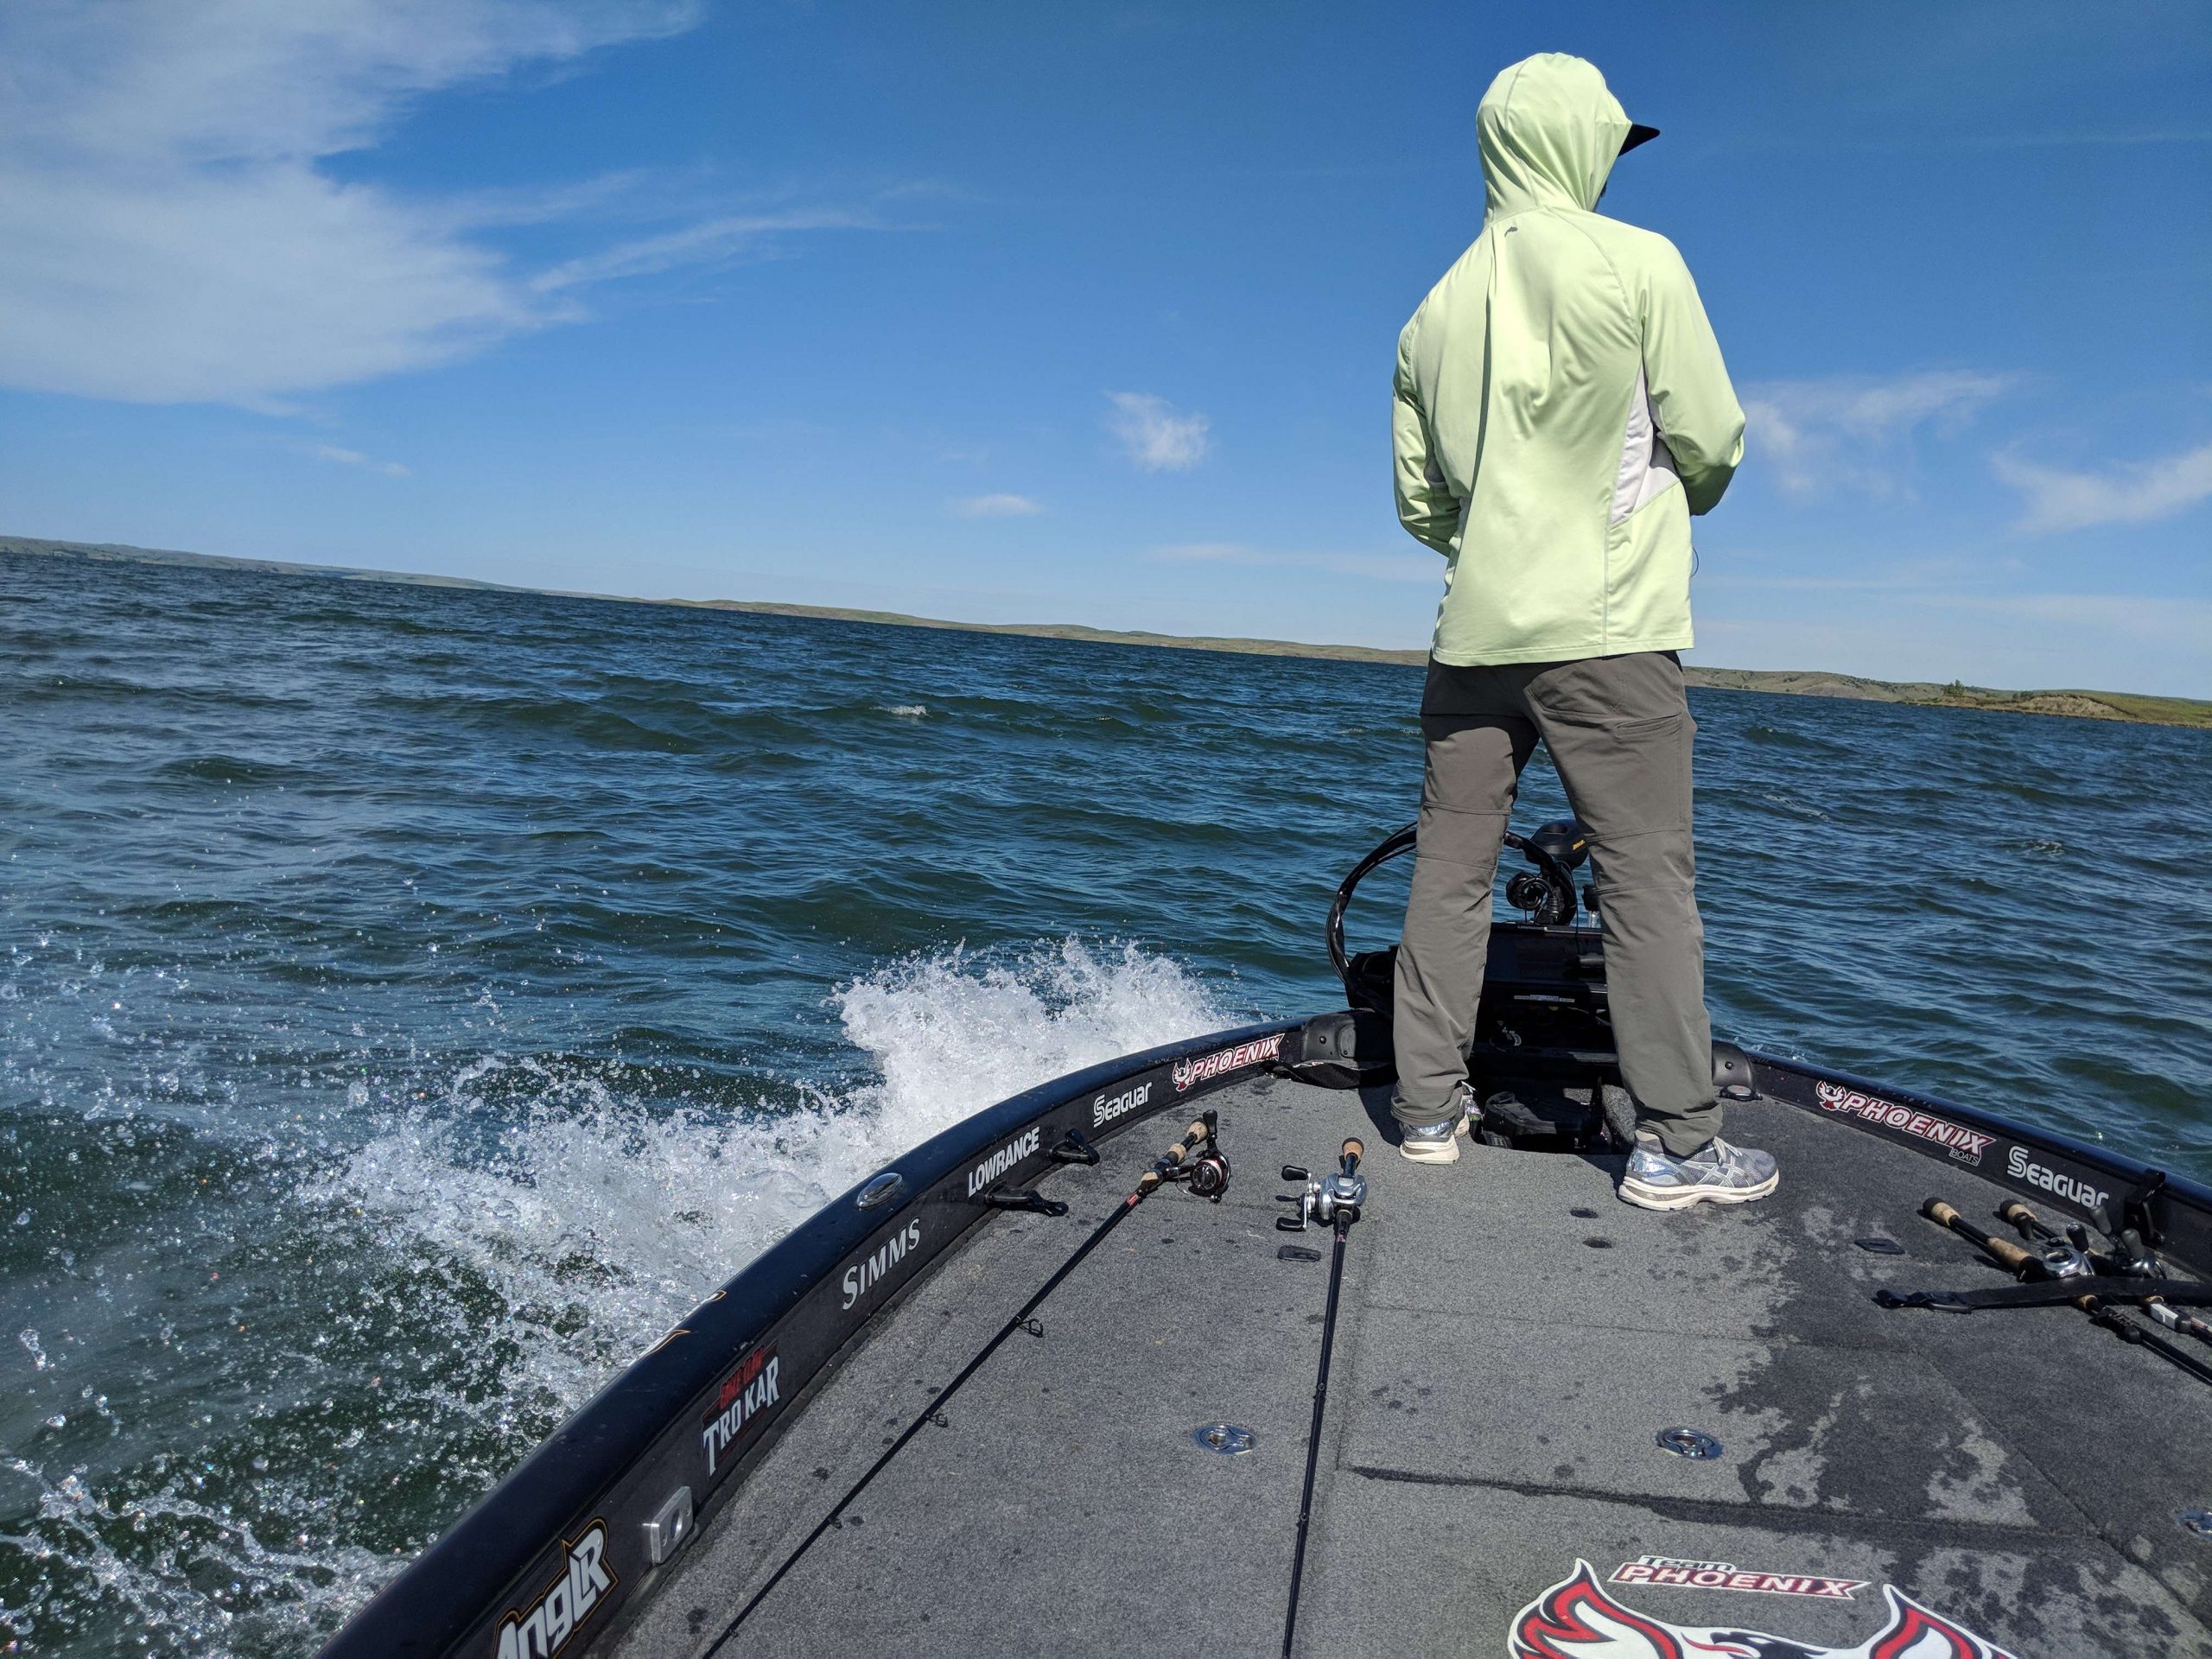 Oahe's calmest days are still rougher than most others. 3 small ones in the box for James Elam early this morning, now struggling to weed through the walleye and catfish to get the right bites.